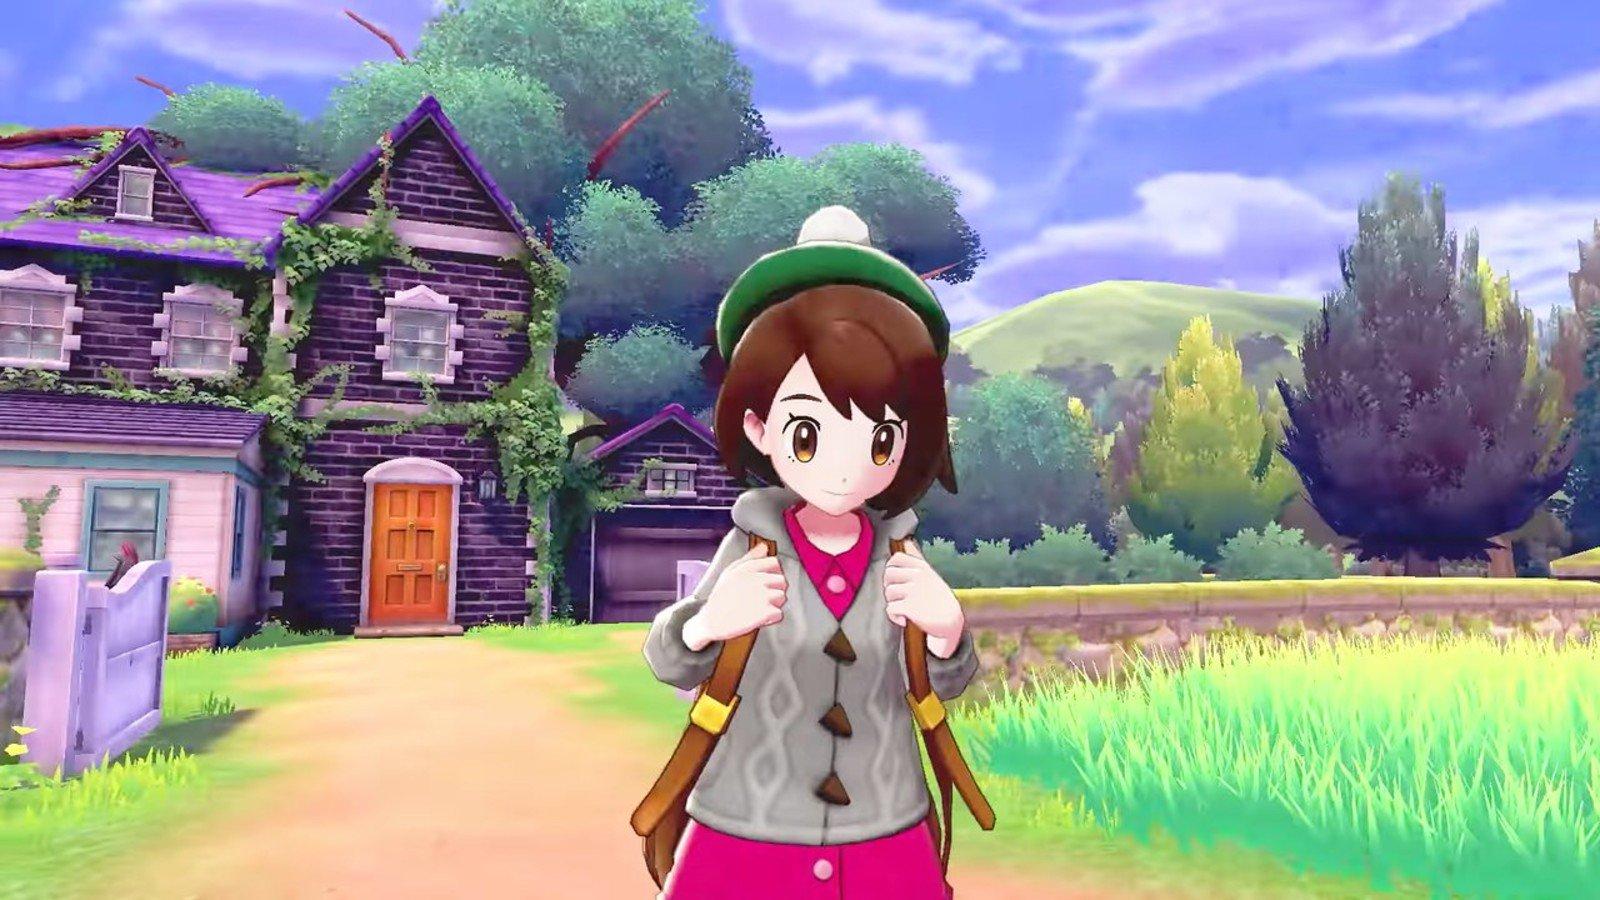 Do you need Nintendo Switch Online for Pokemon Sword and Shield?